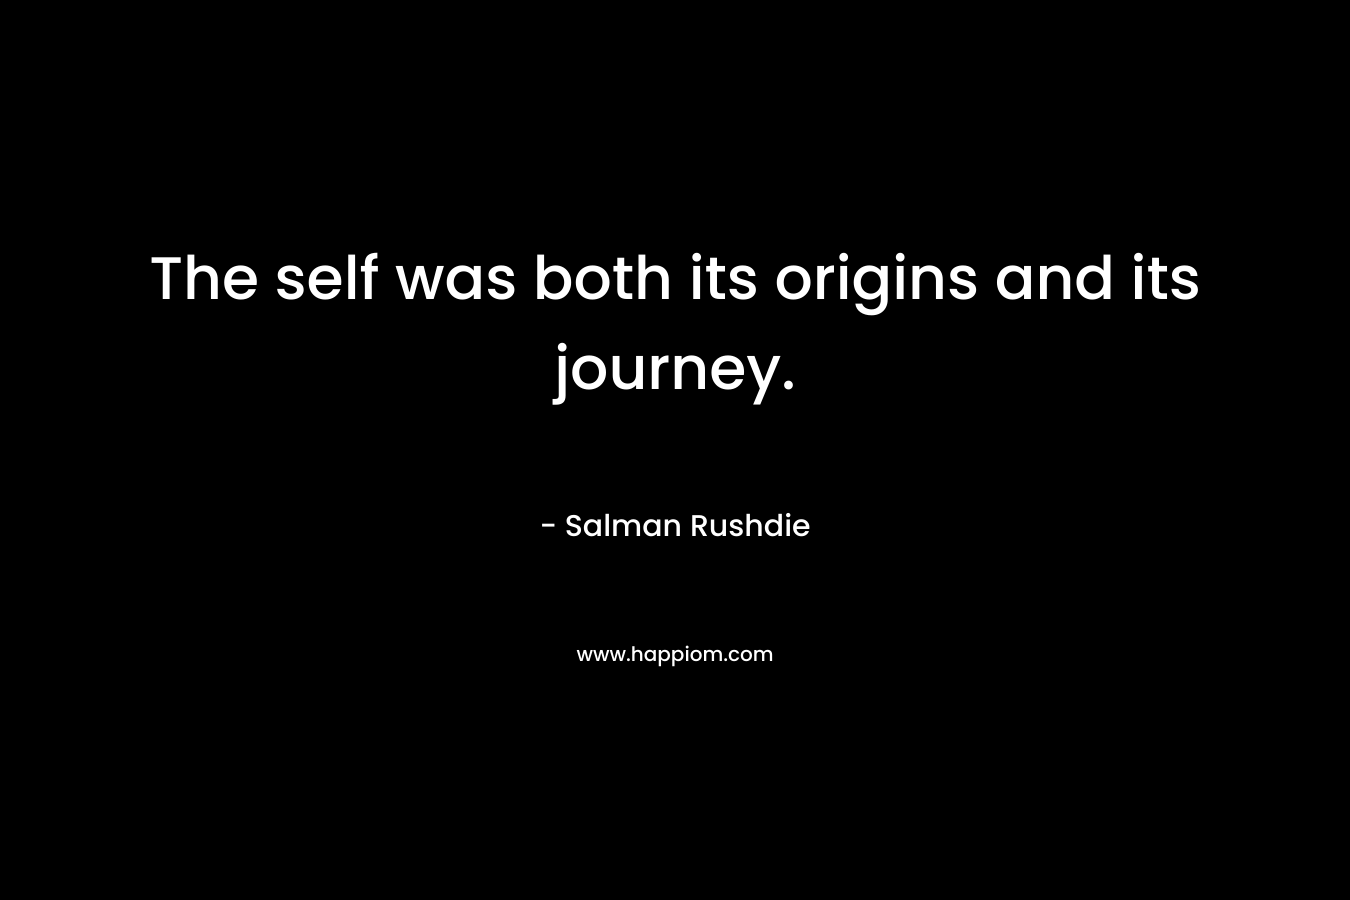 The self was both its origins and its journey. – Salman Rushdie